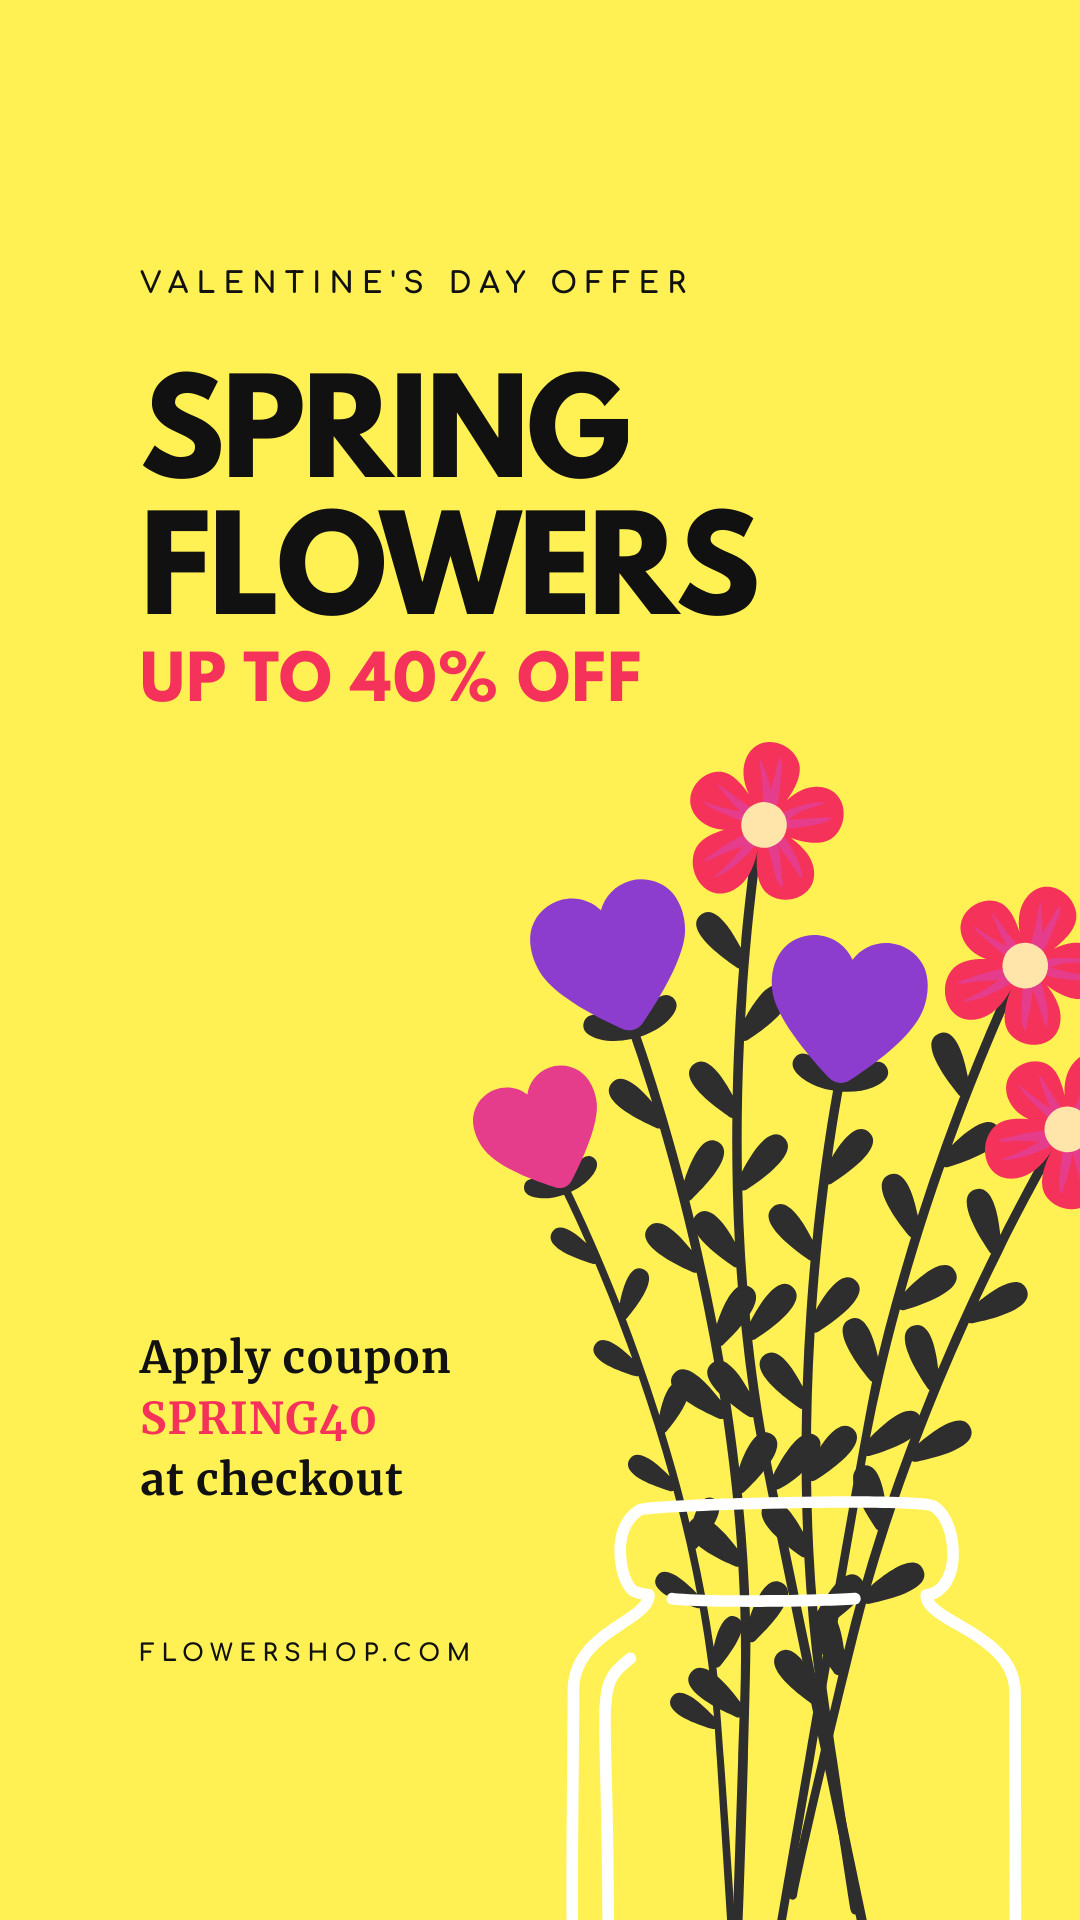 Valentine's Day Spring Flowers Illustration Facebook Cover 820x360